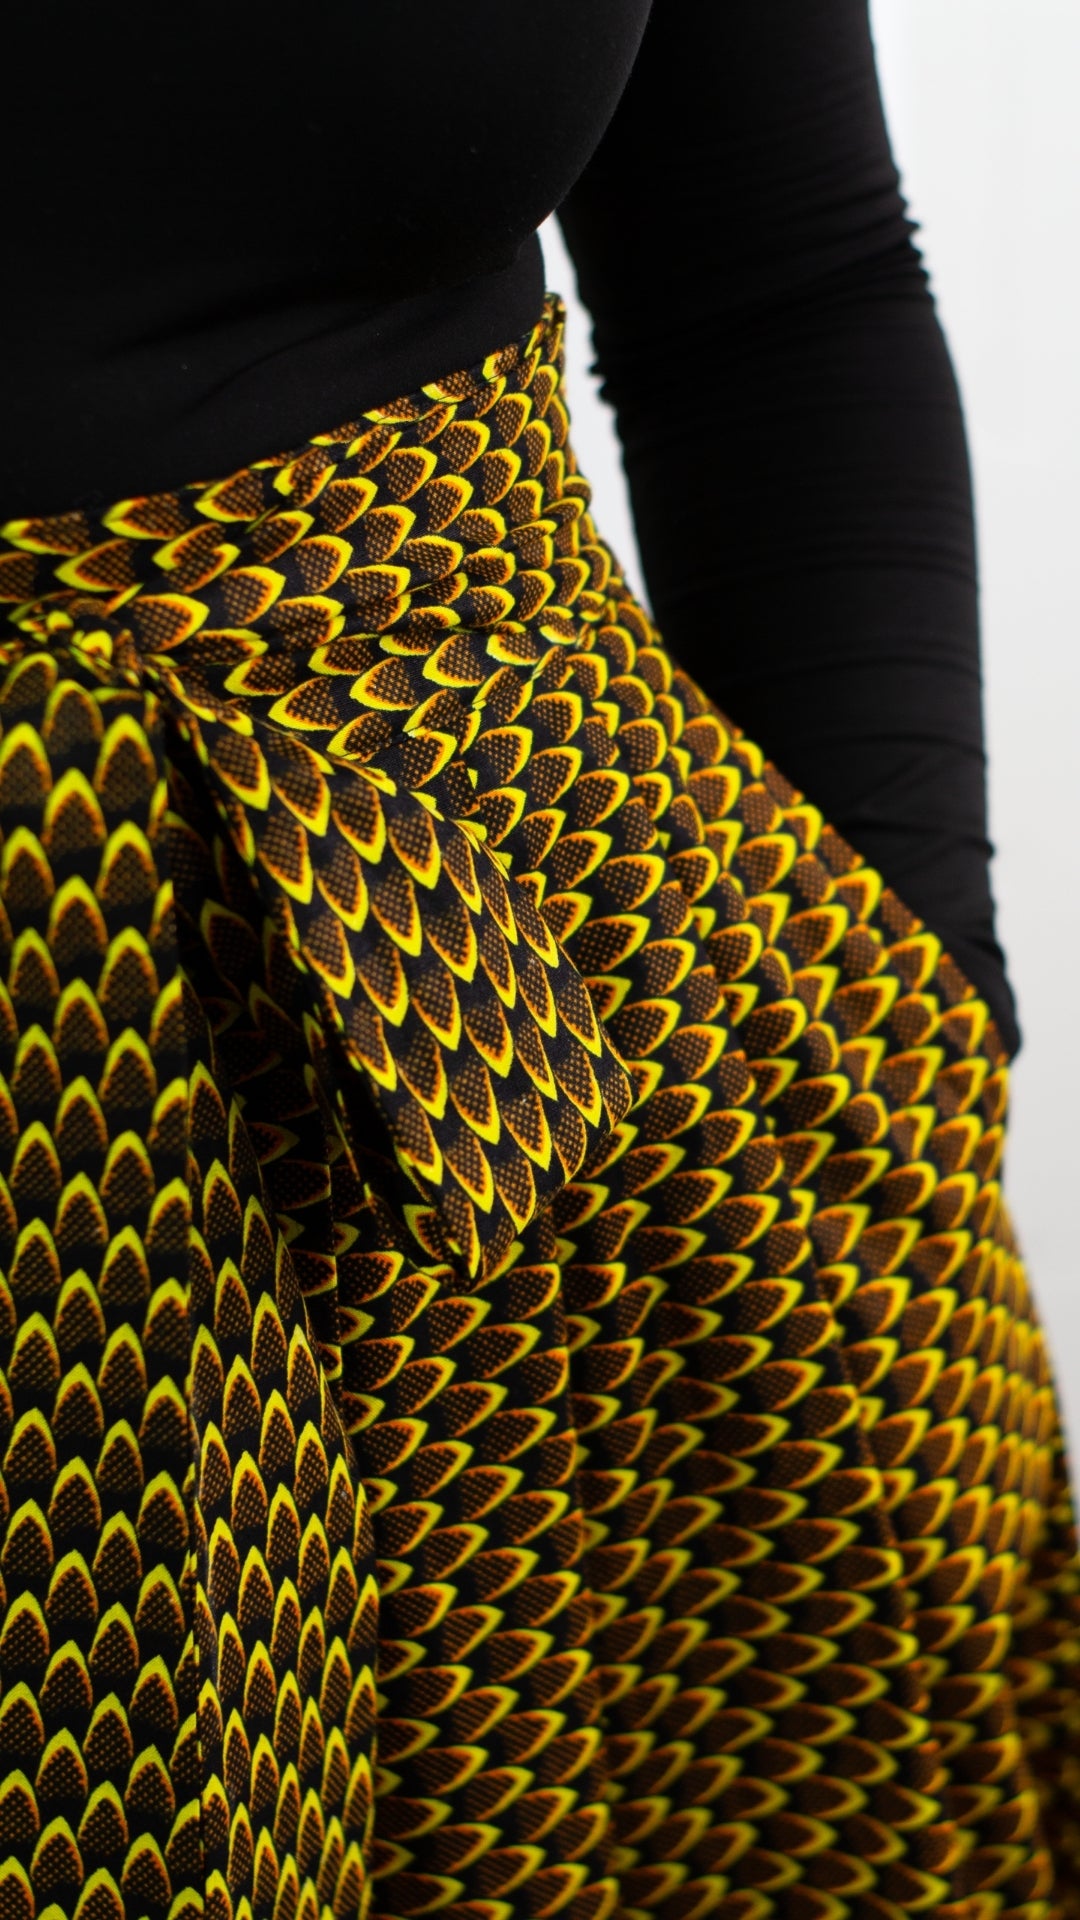 A close-up view capturing the intricate details of a pocket on a yellow-brown African print skirt. This image offers a detailed glimpse, showcasing the unique patterns and craftsmanship of the skirt in vivid detail.